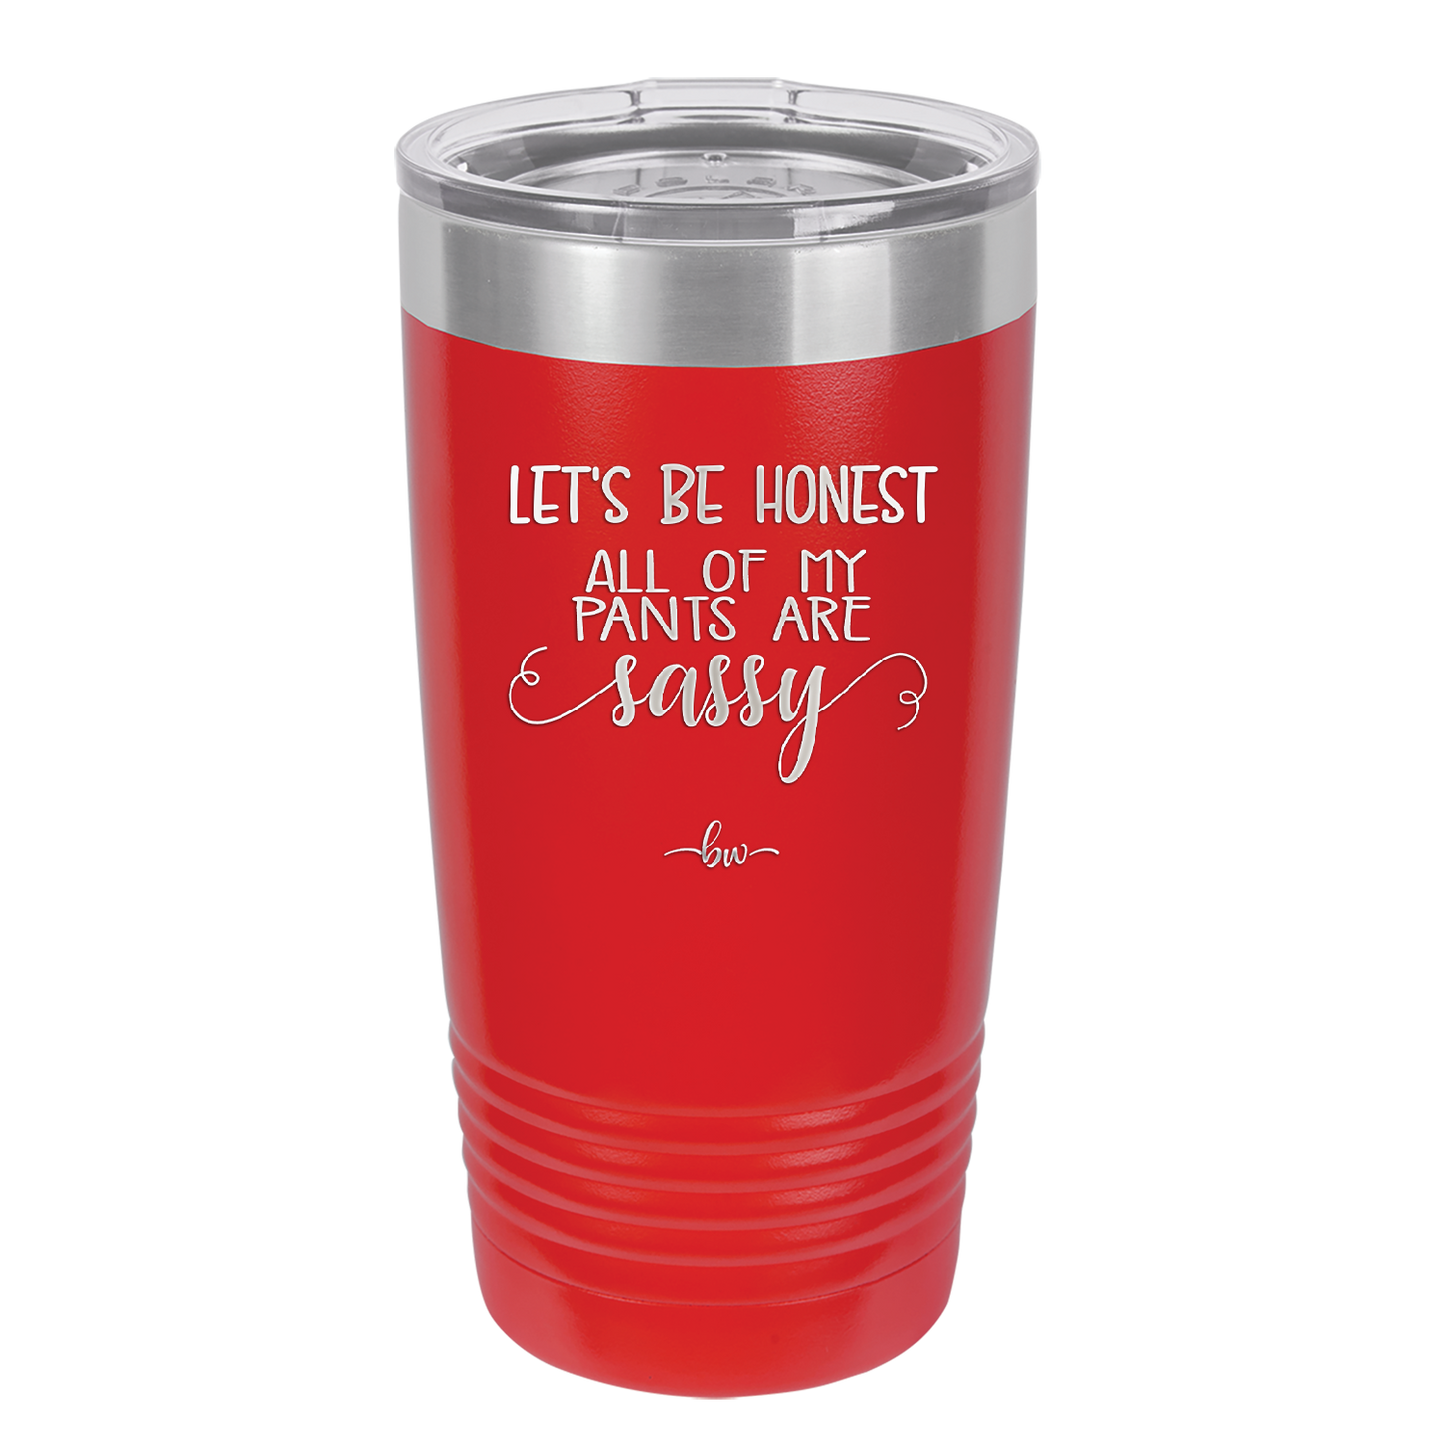 Let's Be Honest All of My Pants are Sassy - Laser Engraved Stainless Steel Drinkware - 2439 -